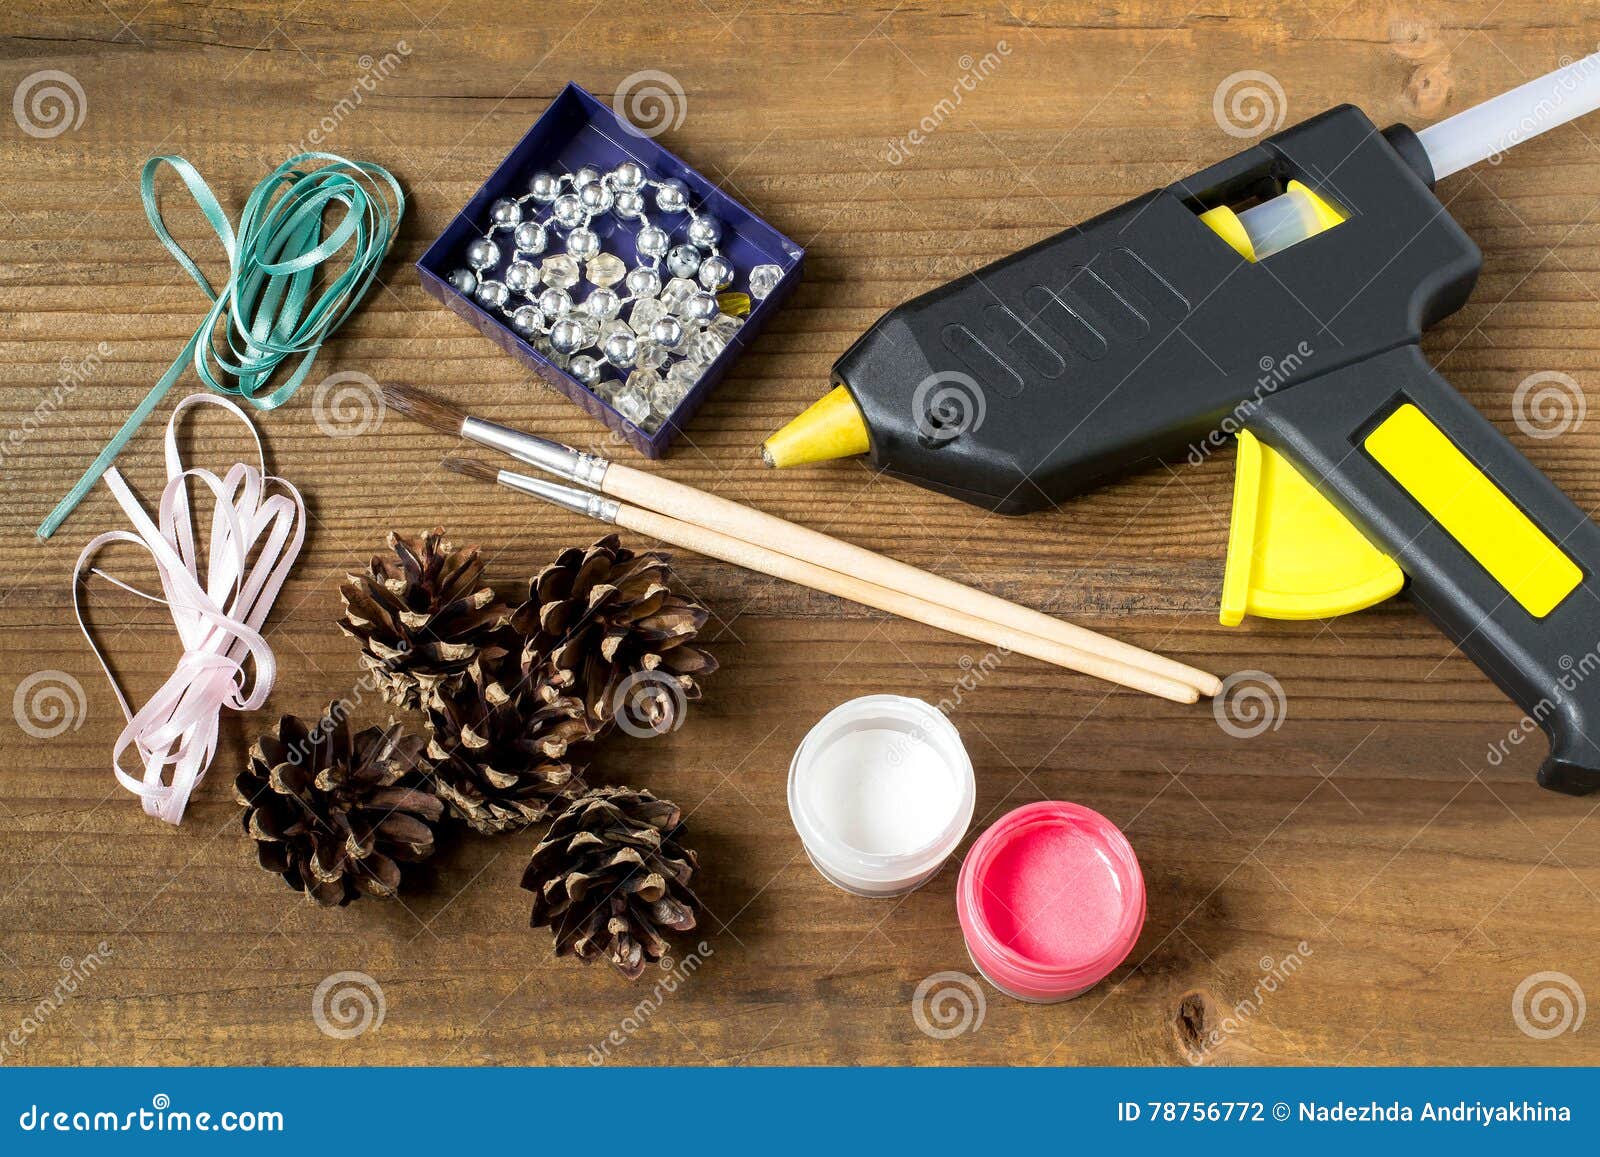 Woman glues pasta with a hot glue gun during the manufacture of crafts  Stock Photo